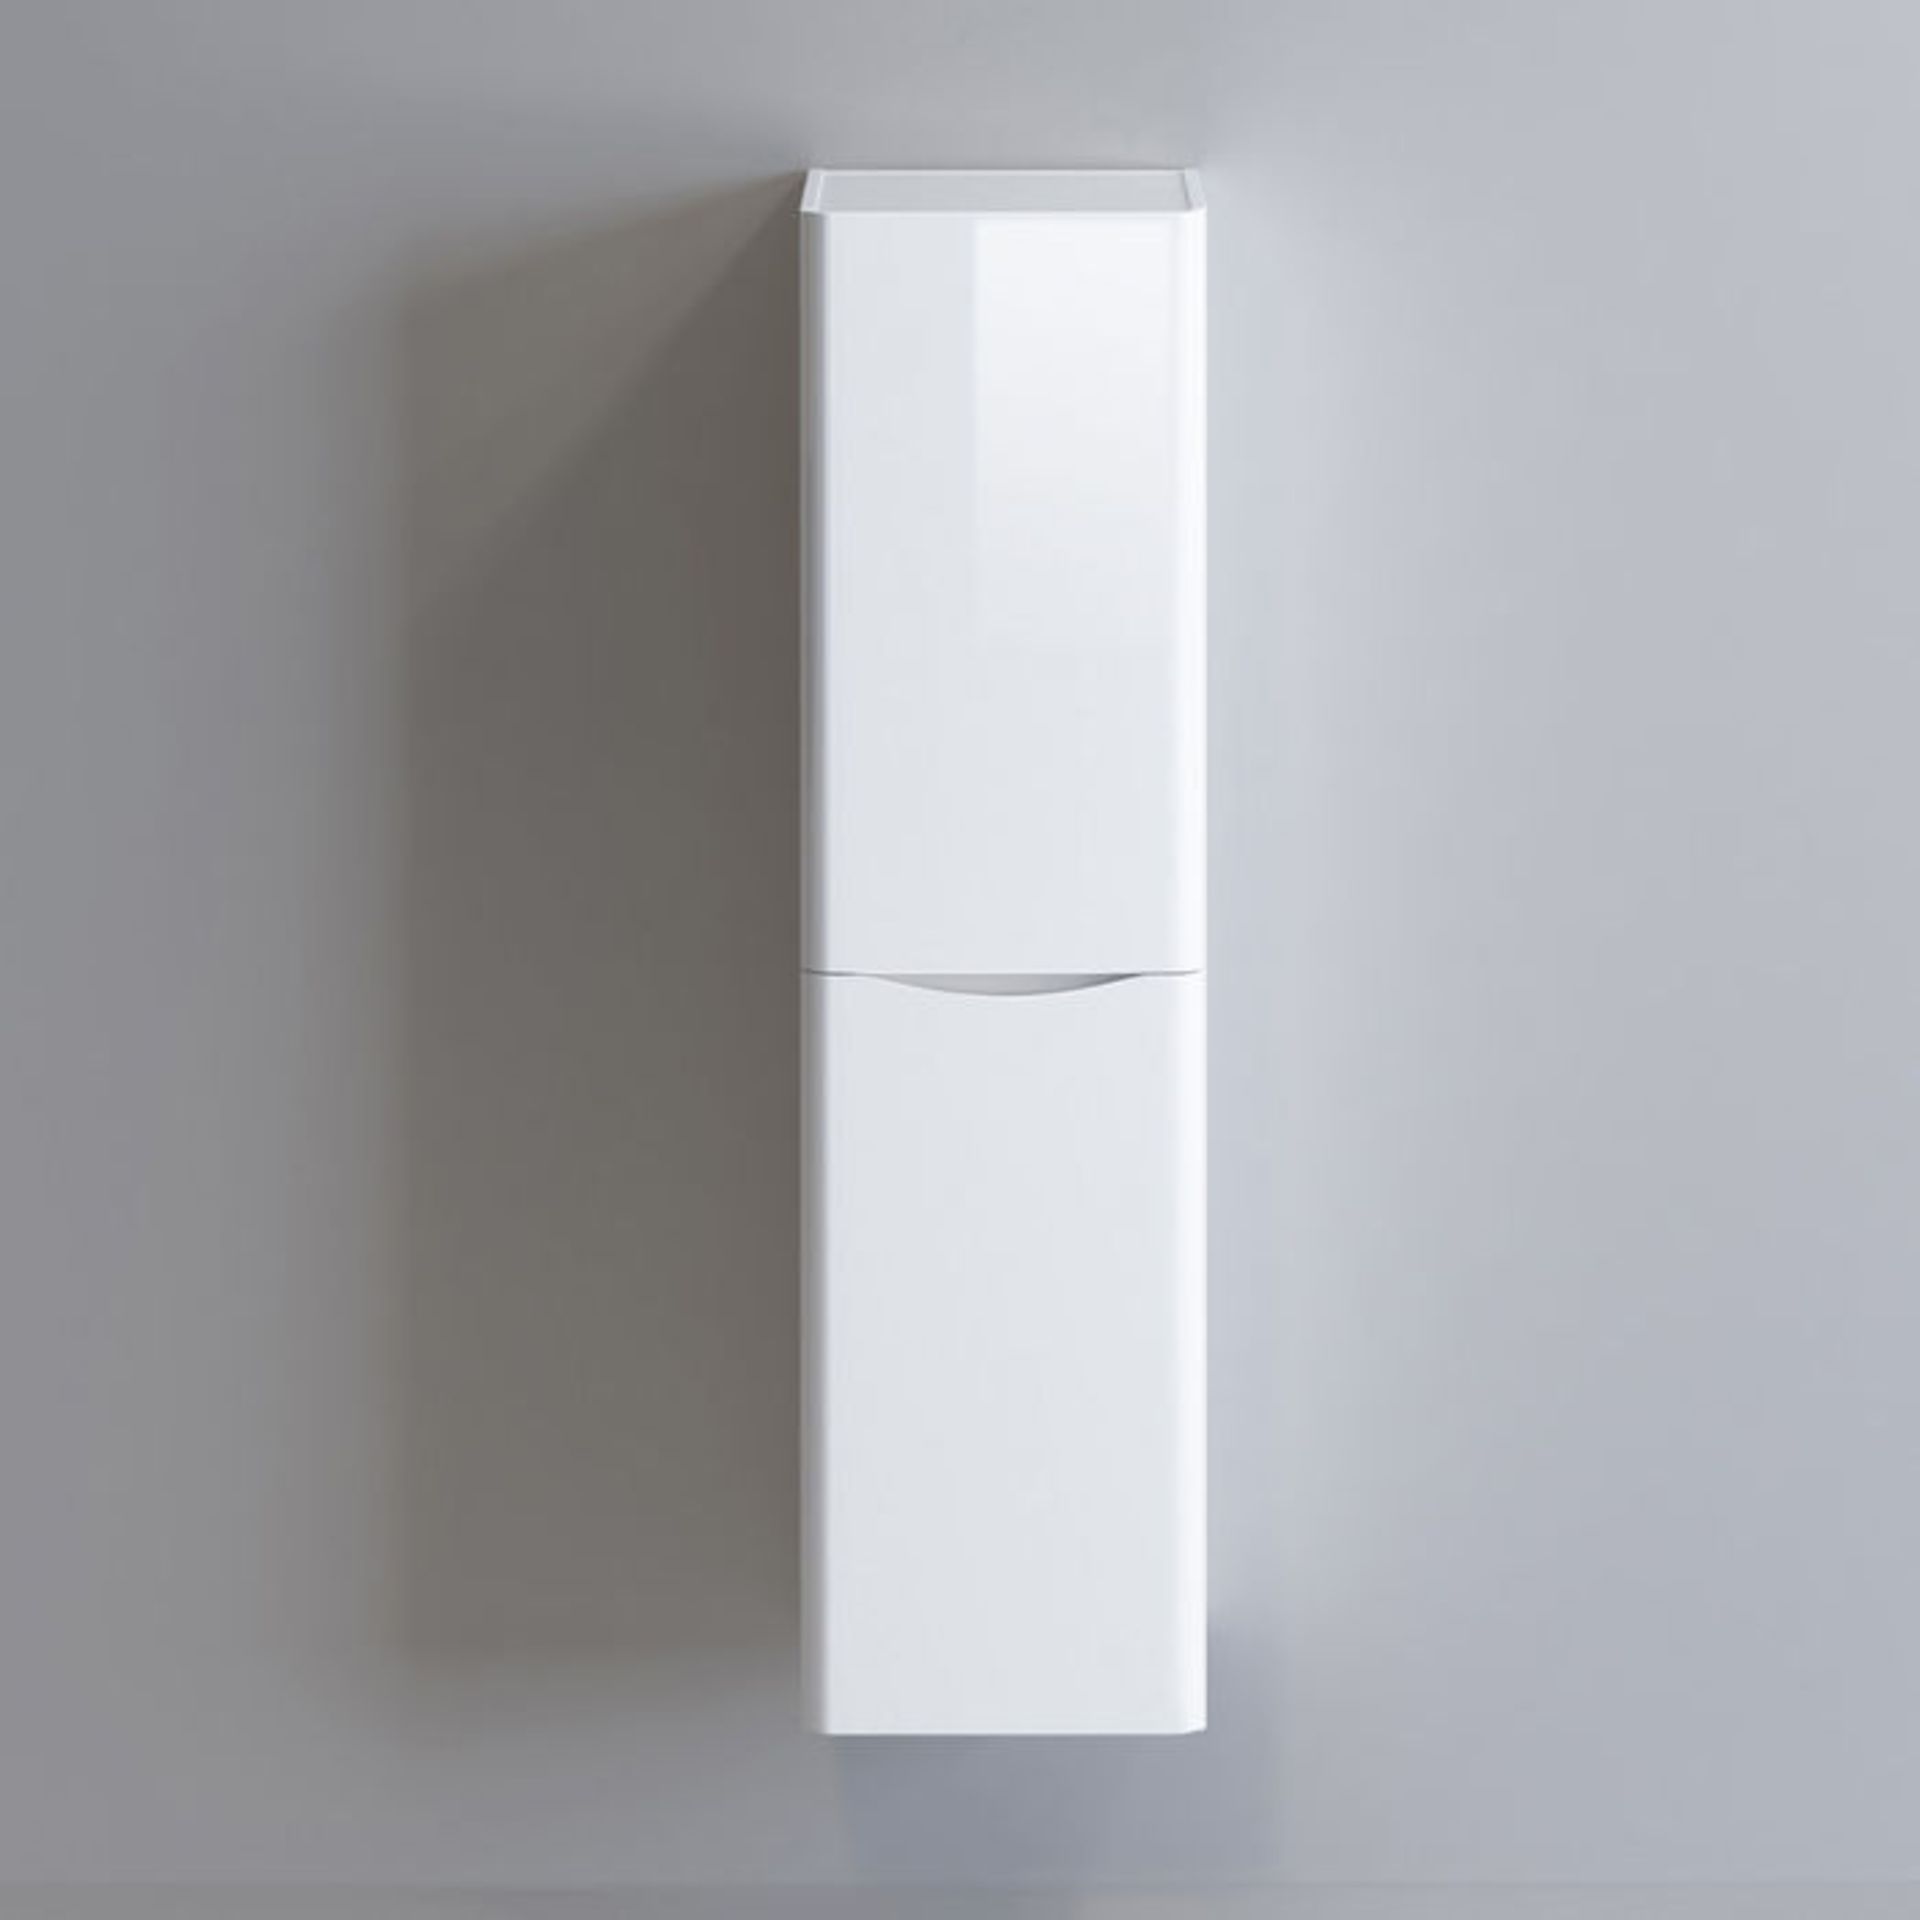 (SP52) 1400mm Austin II Gloss White Tall Wall Hung Storage Cabinet - Right Hand. RRP £299.99. - Image 5 of 5